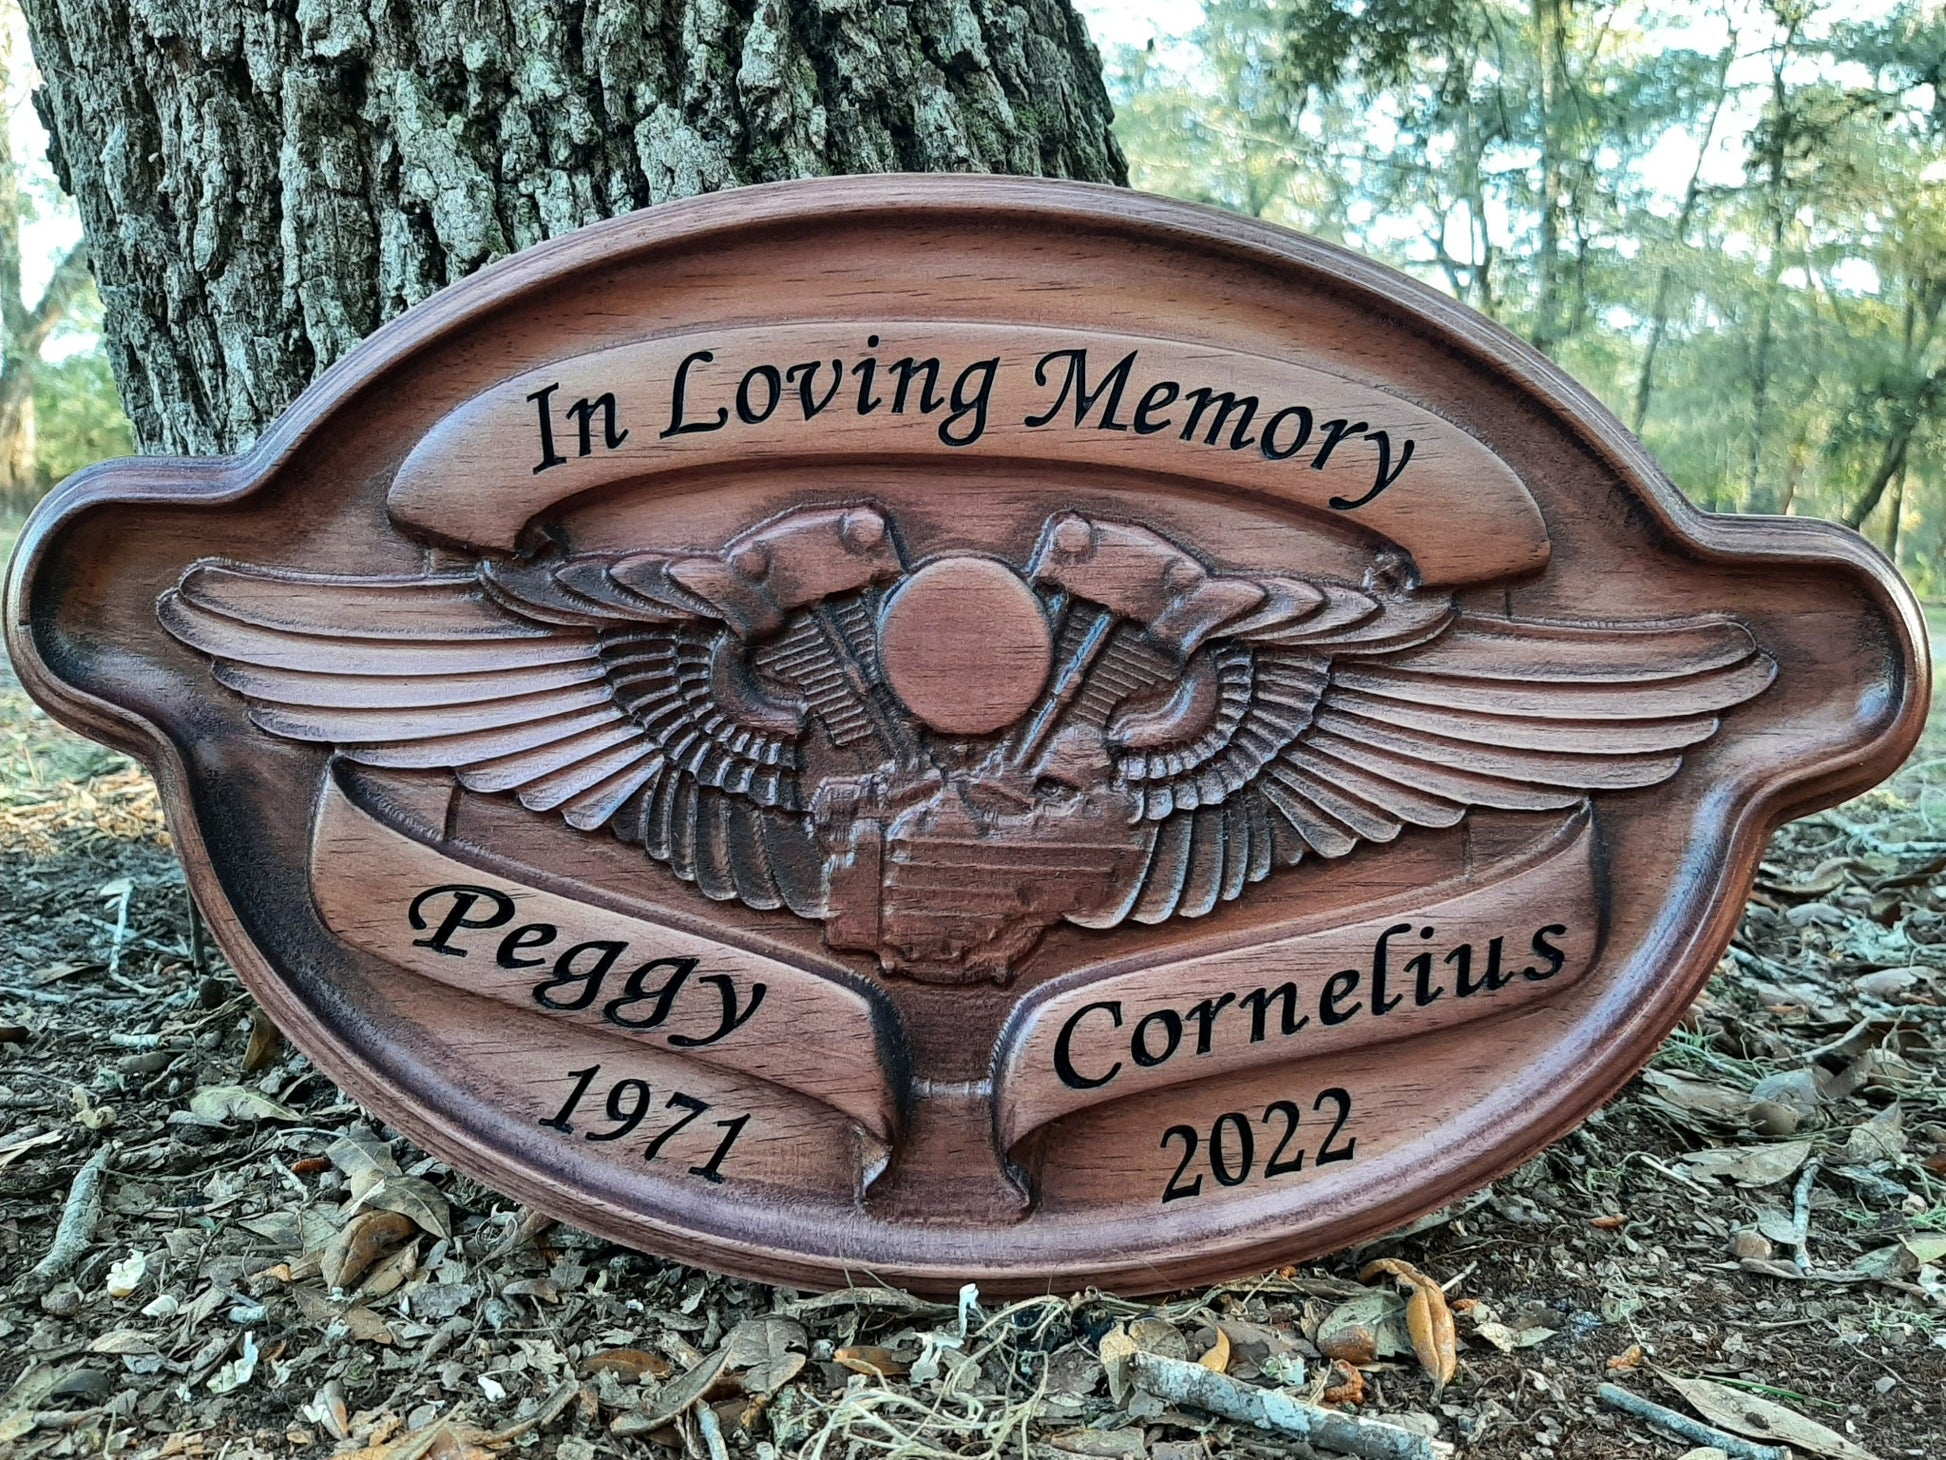 3D wood carved Harley Davidson memorial gift sign made in the USA.